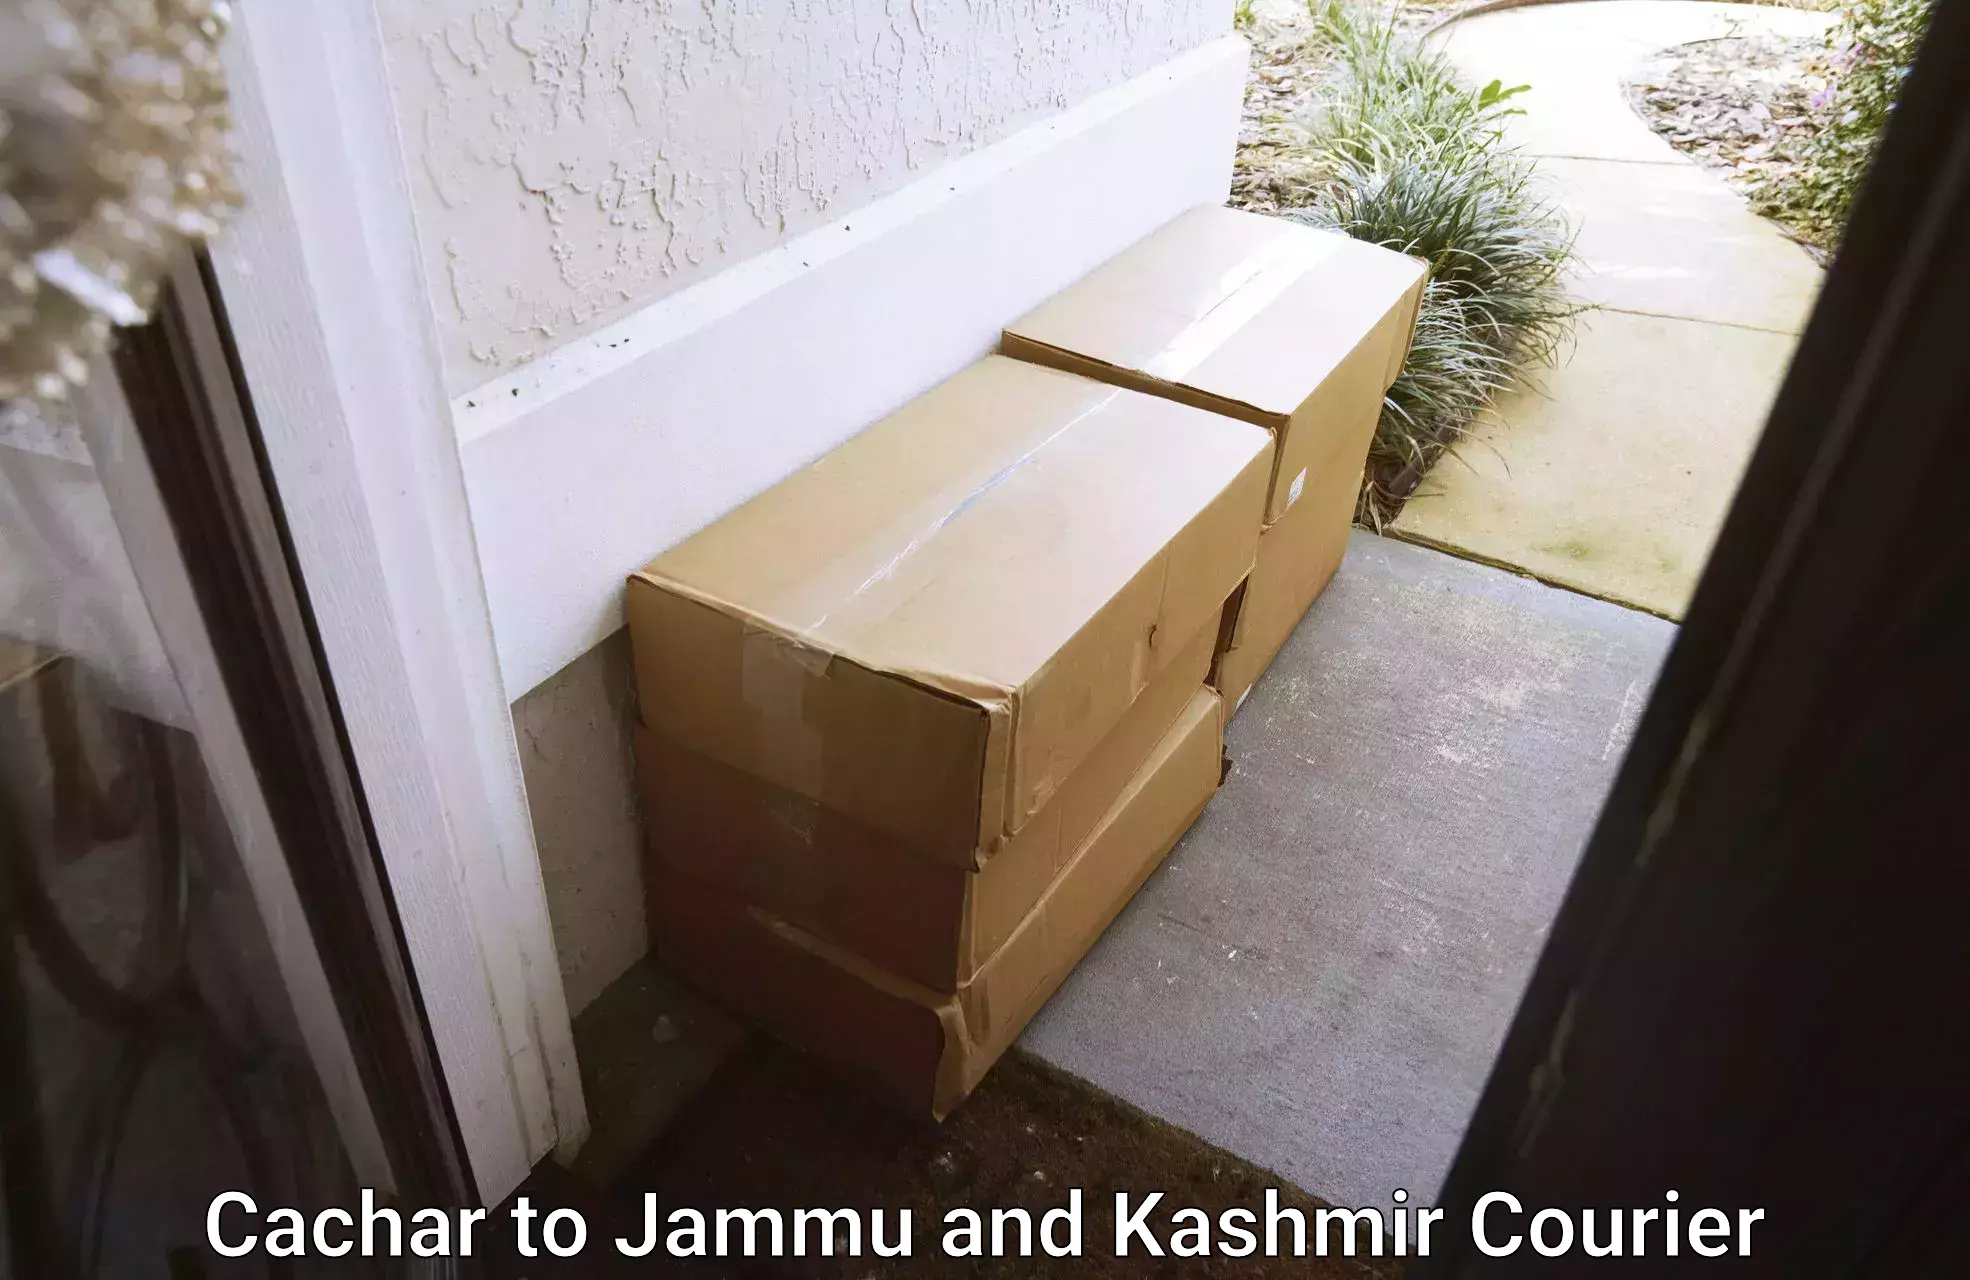 State-of-the-art courier technology Cachar to University of Jammu